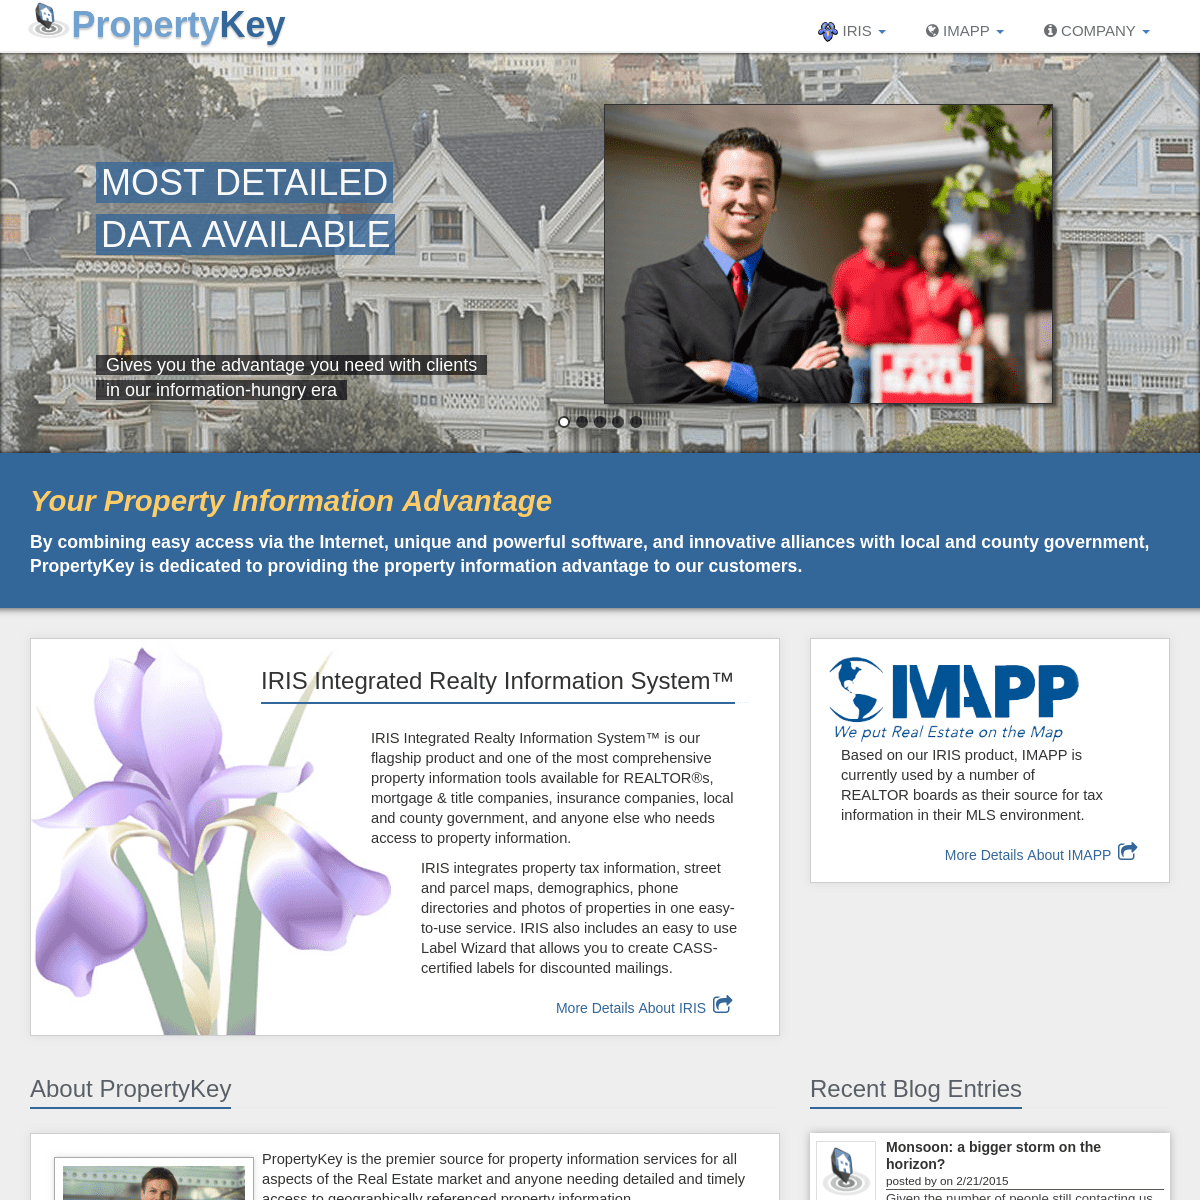 PropertyKey: unlocking a world of property information - property tax, parcel maps, and more...